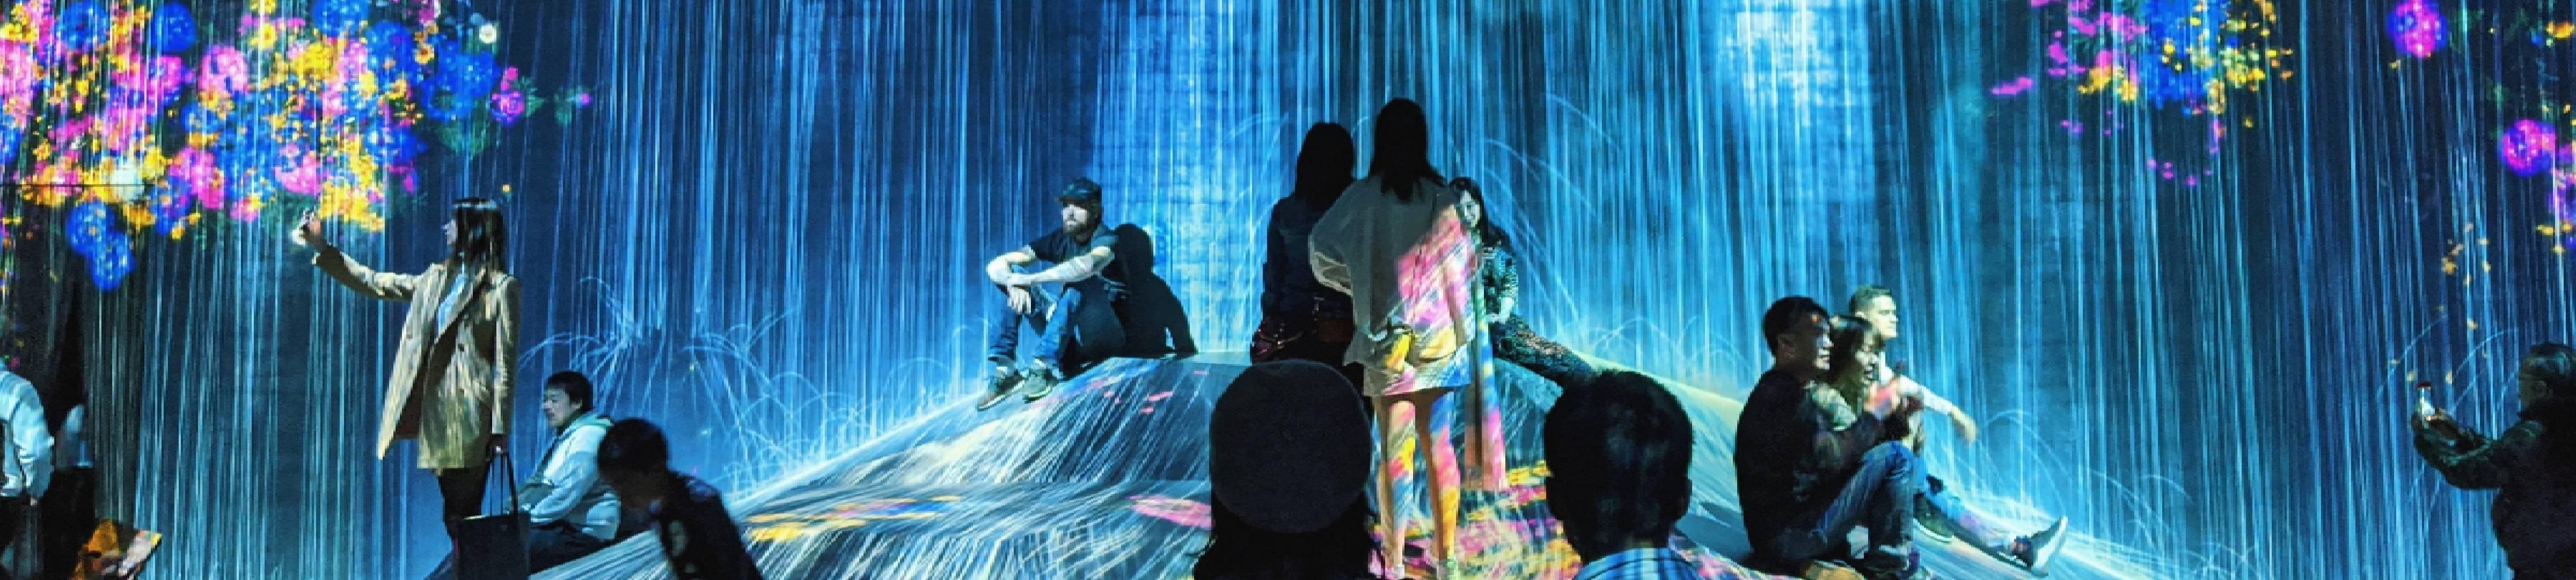 A digital art installation that projects experimental imagery over people as they explore the a interactive room